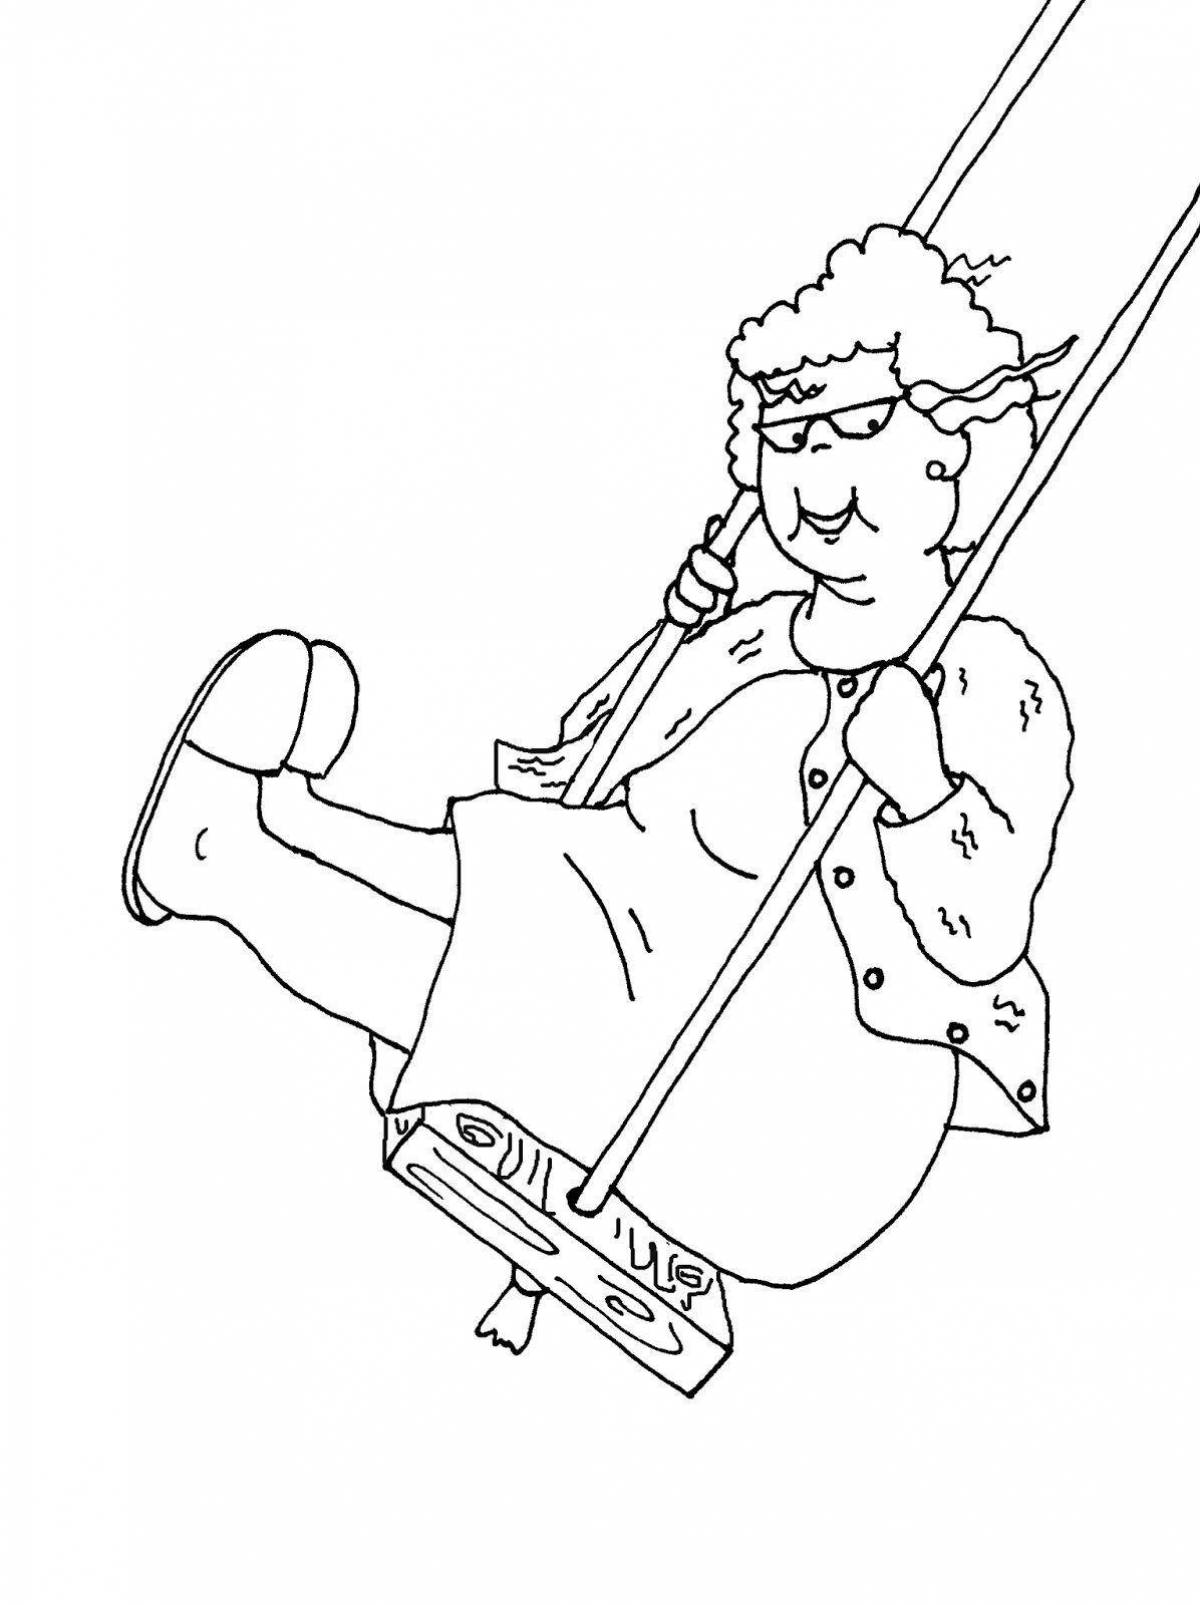 Funny grandparents coloring page